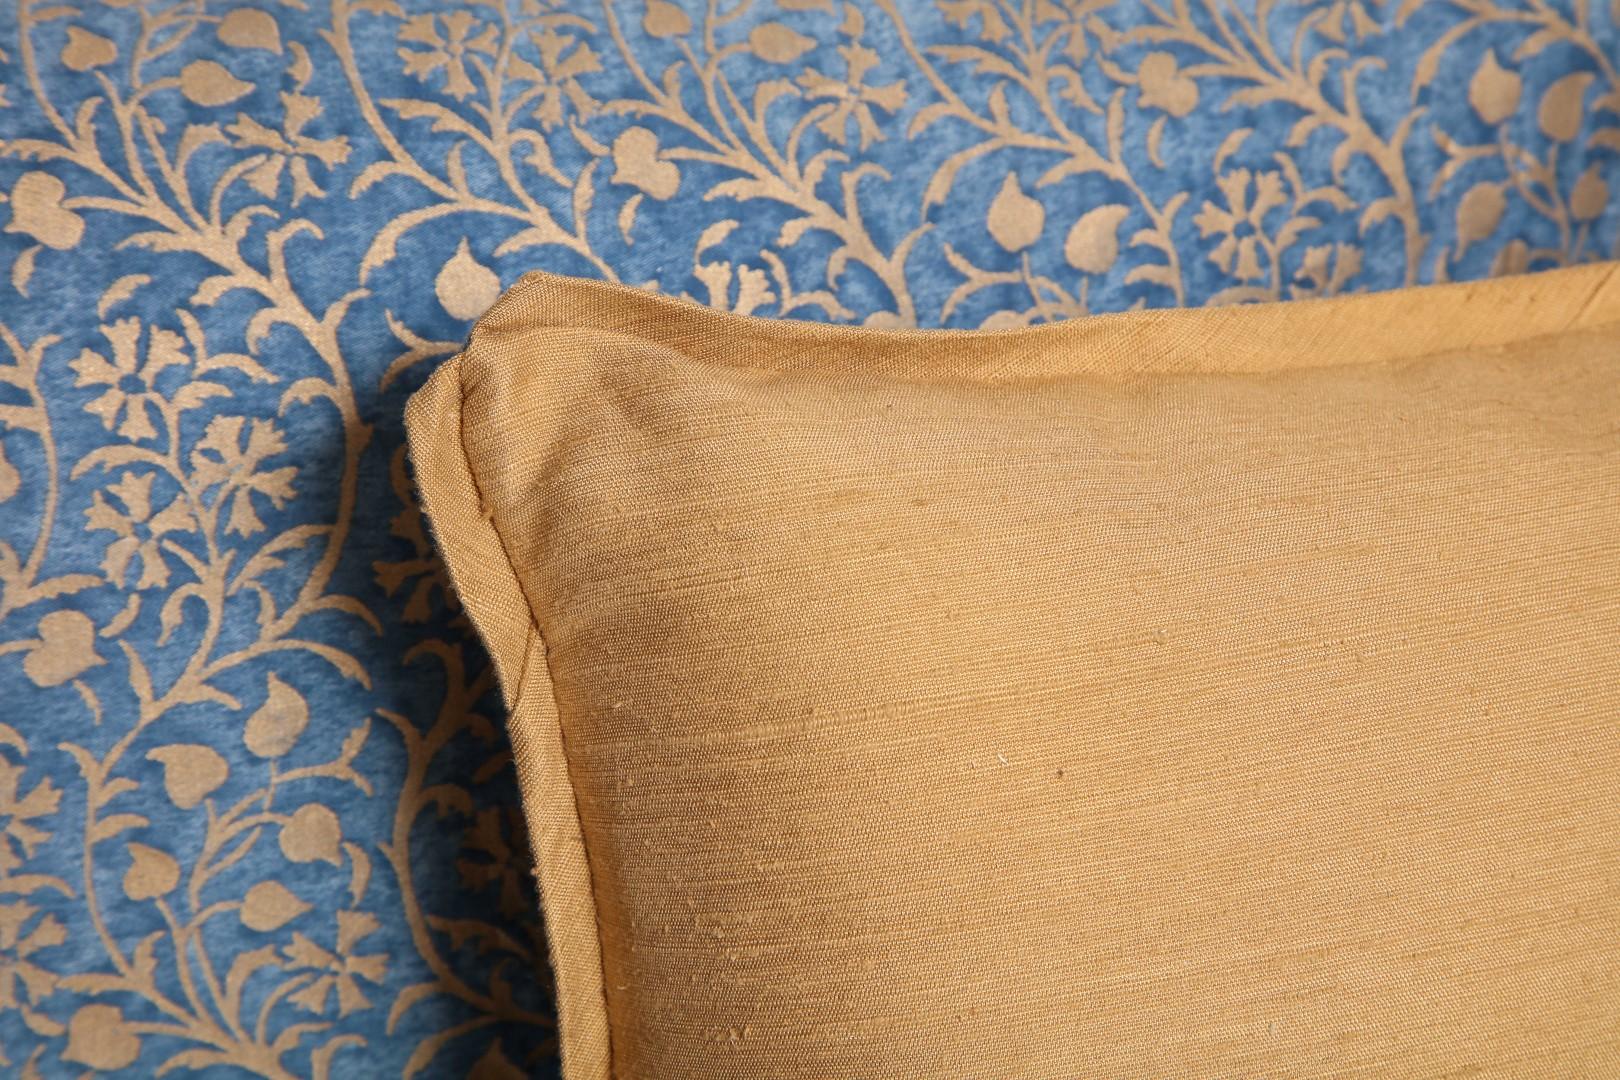 North American Pair of Fortuny Fabric Cushions in the Granada Pattern